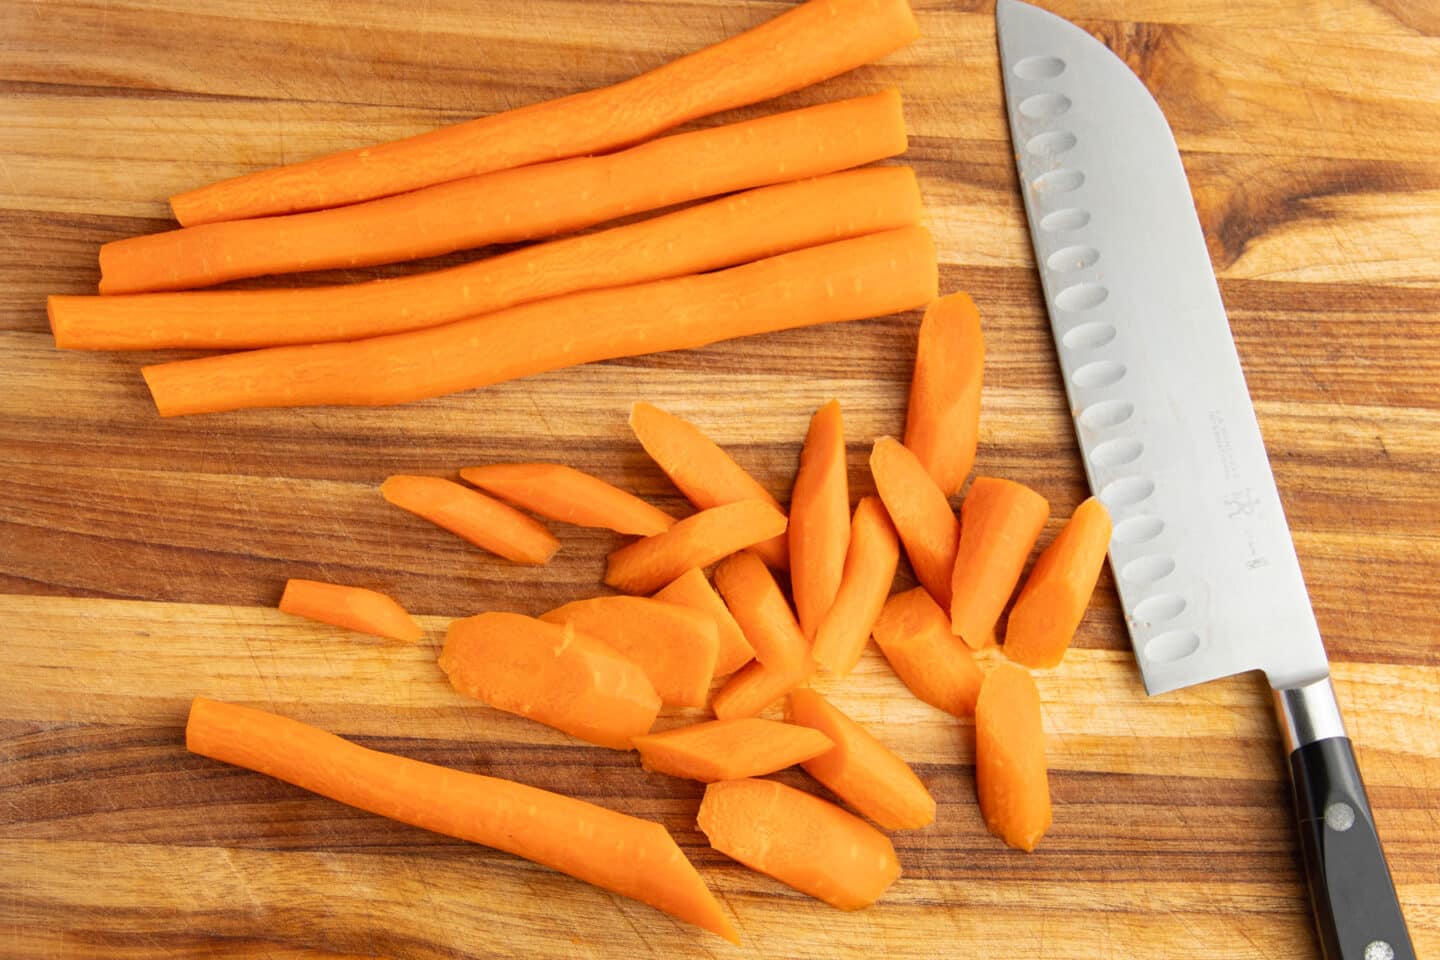 This is a picture of carrots being chopped.